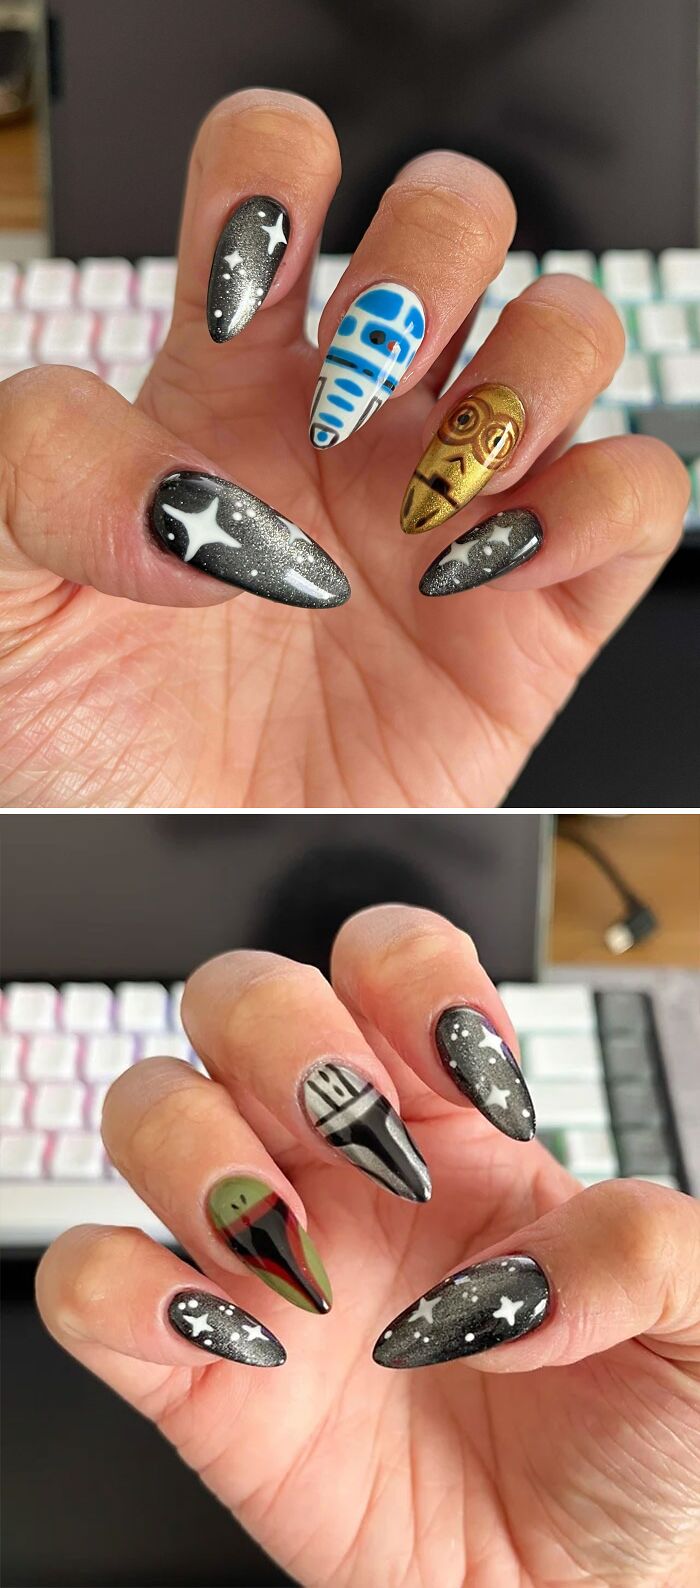 These Aren't The Droids You're Looking For. DIY Nails For My Trip To Disney Next Week